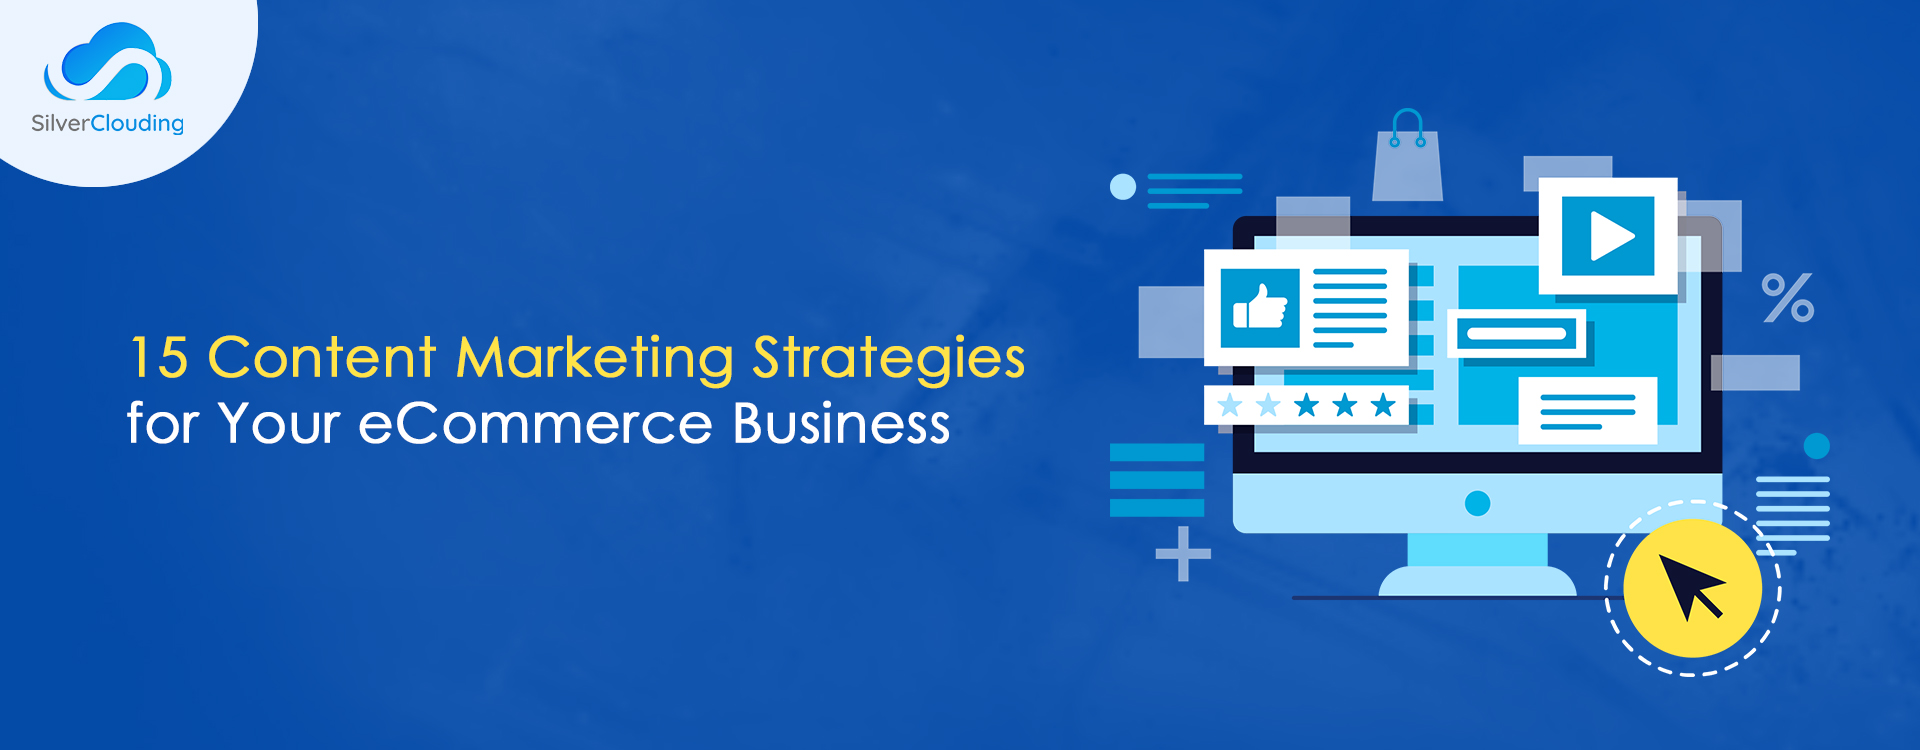 Content Marketing Strategies for eCommerce Businesses: What? Why? Which?